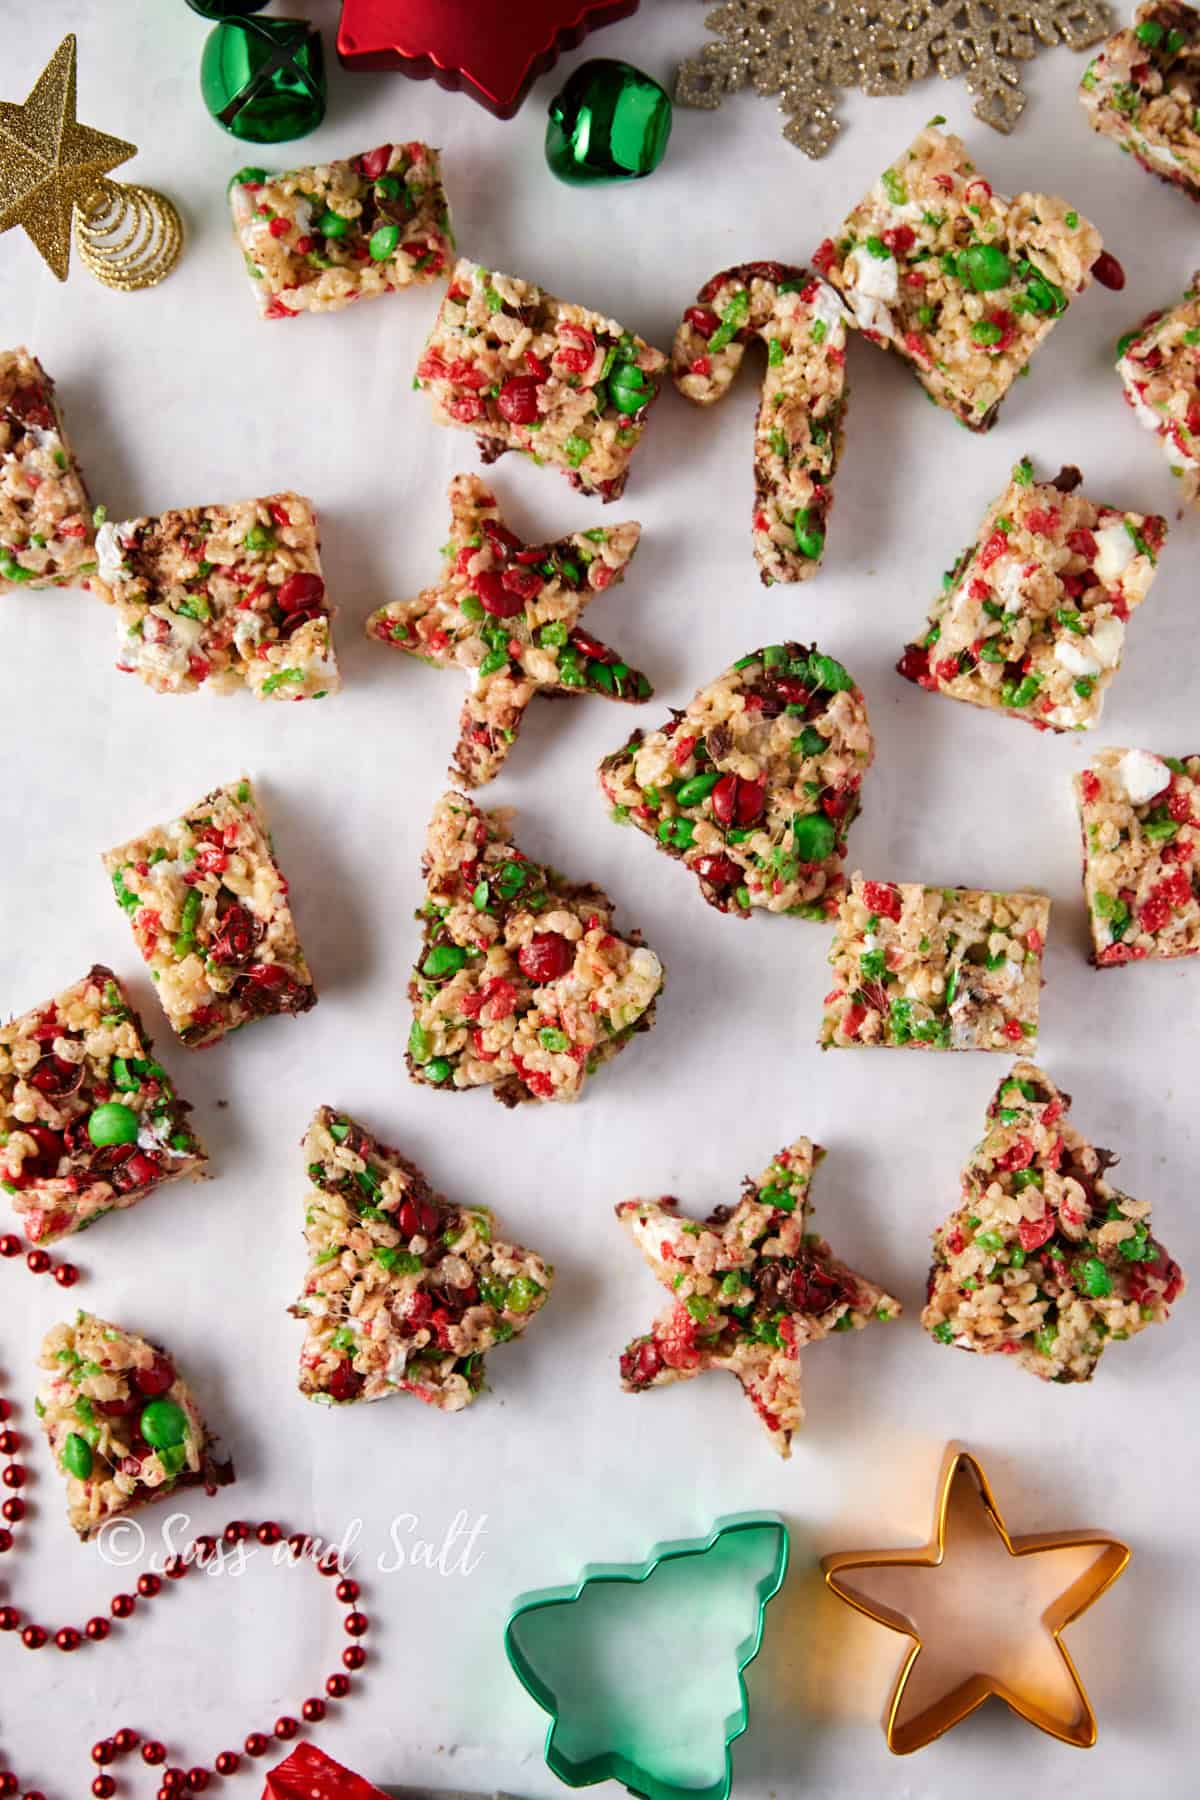 Overhead view of Christmas Rice Krispie treats cut into shapes.